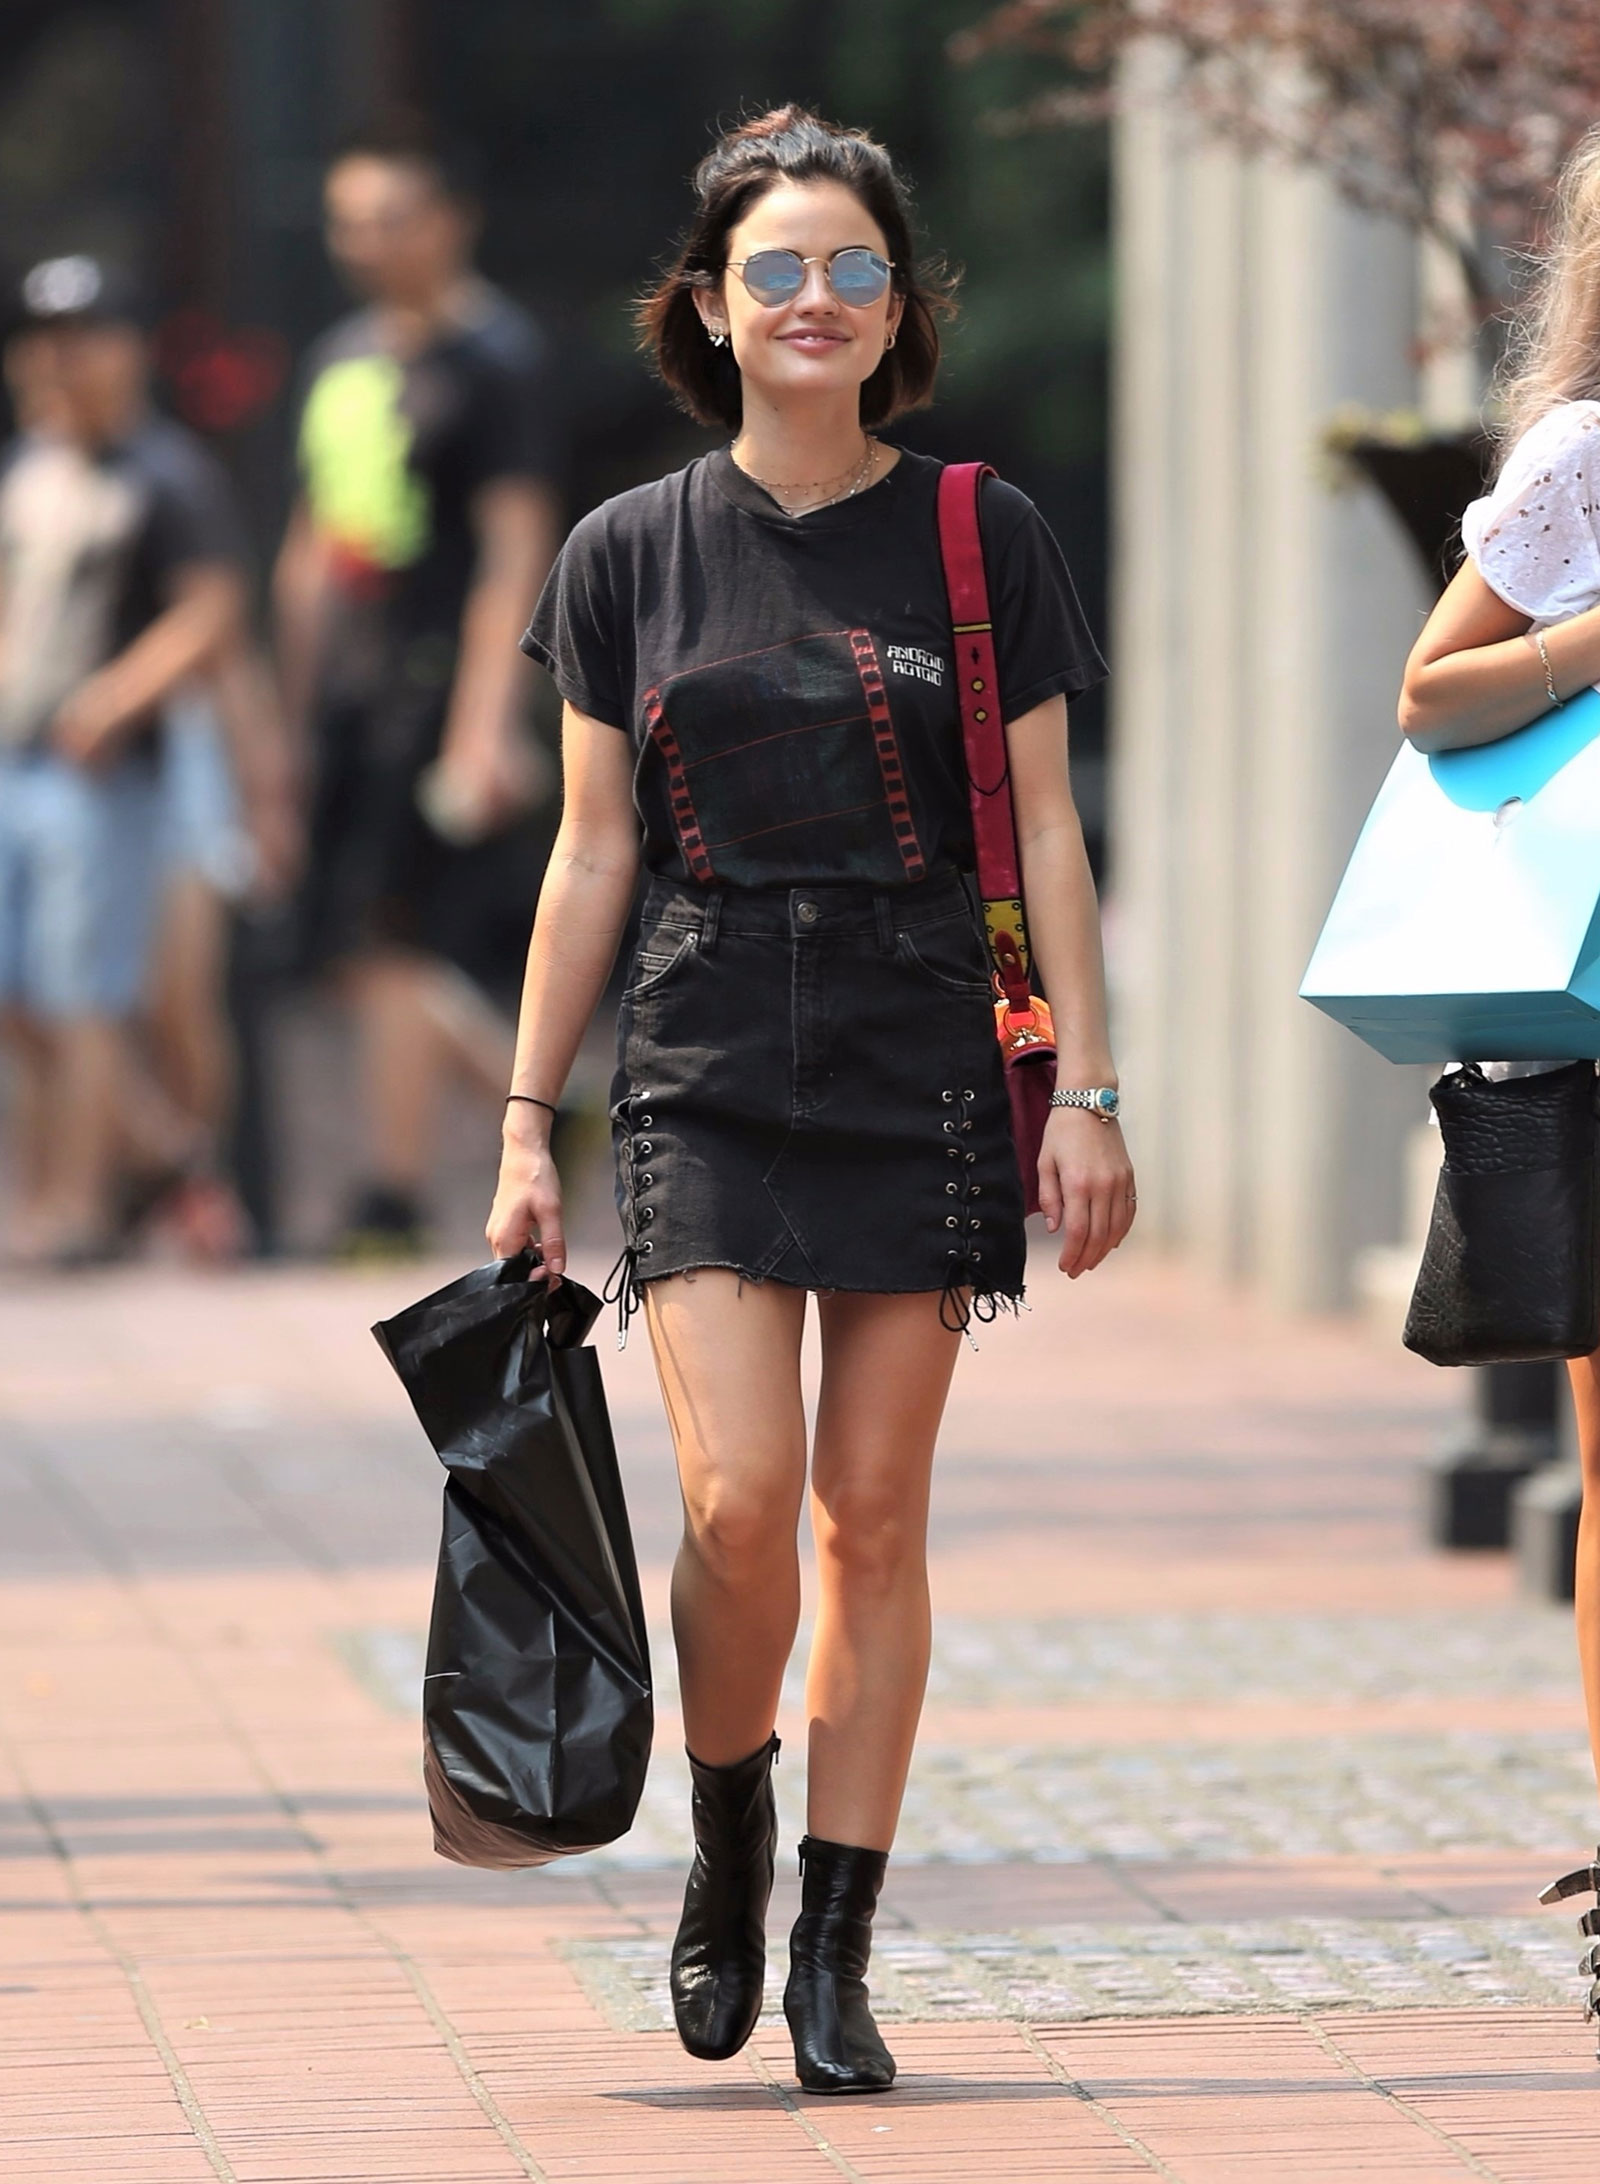 Lucy Hale steps out in a black denim mini and sock boots.